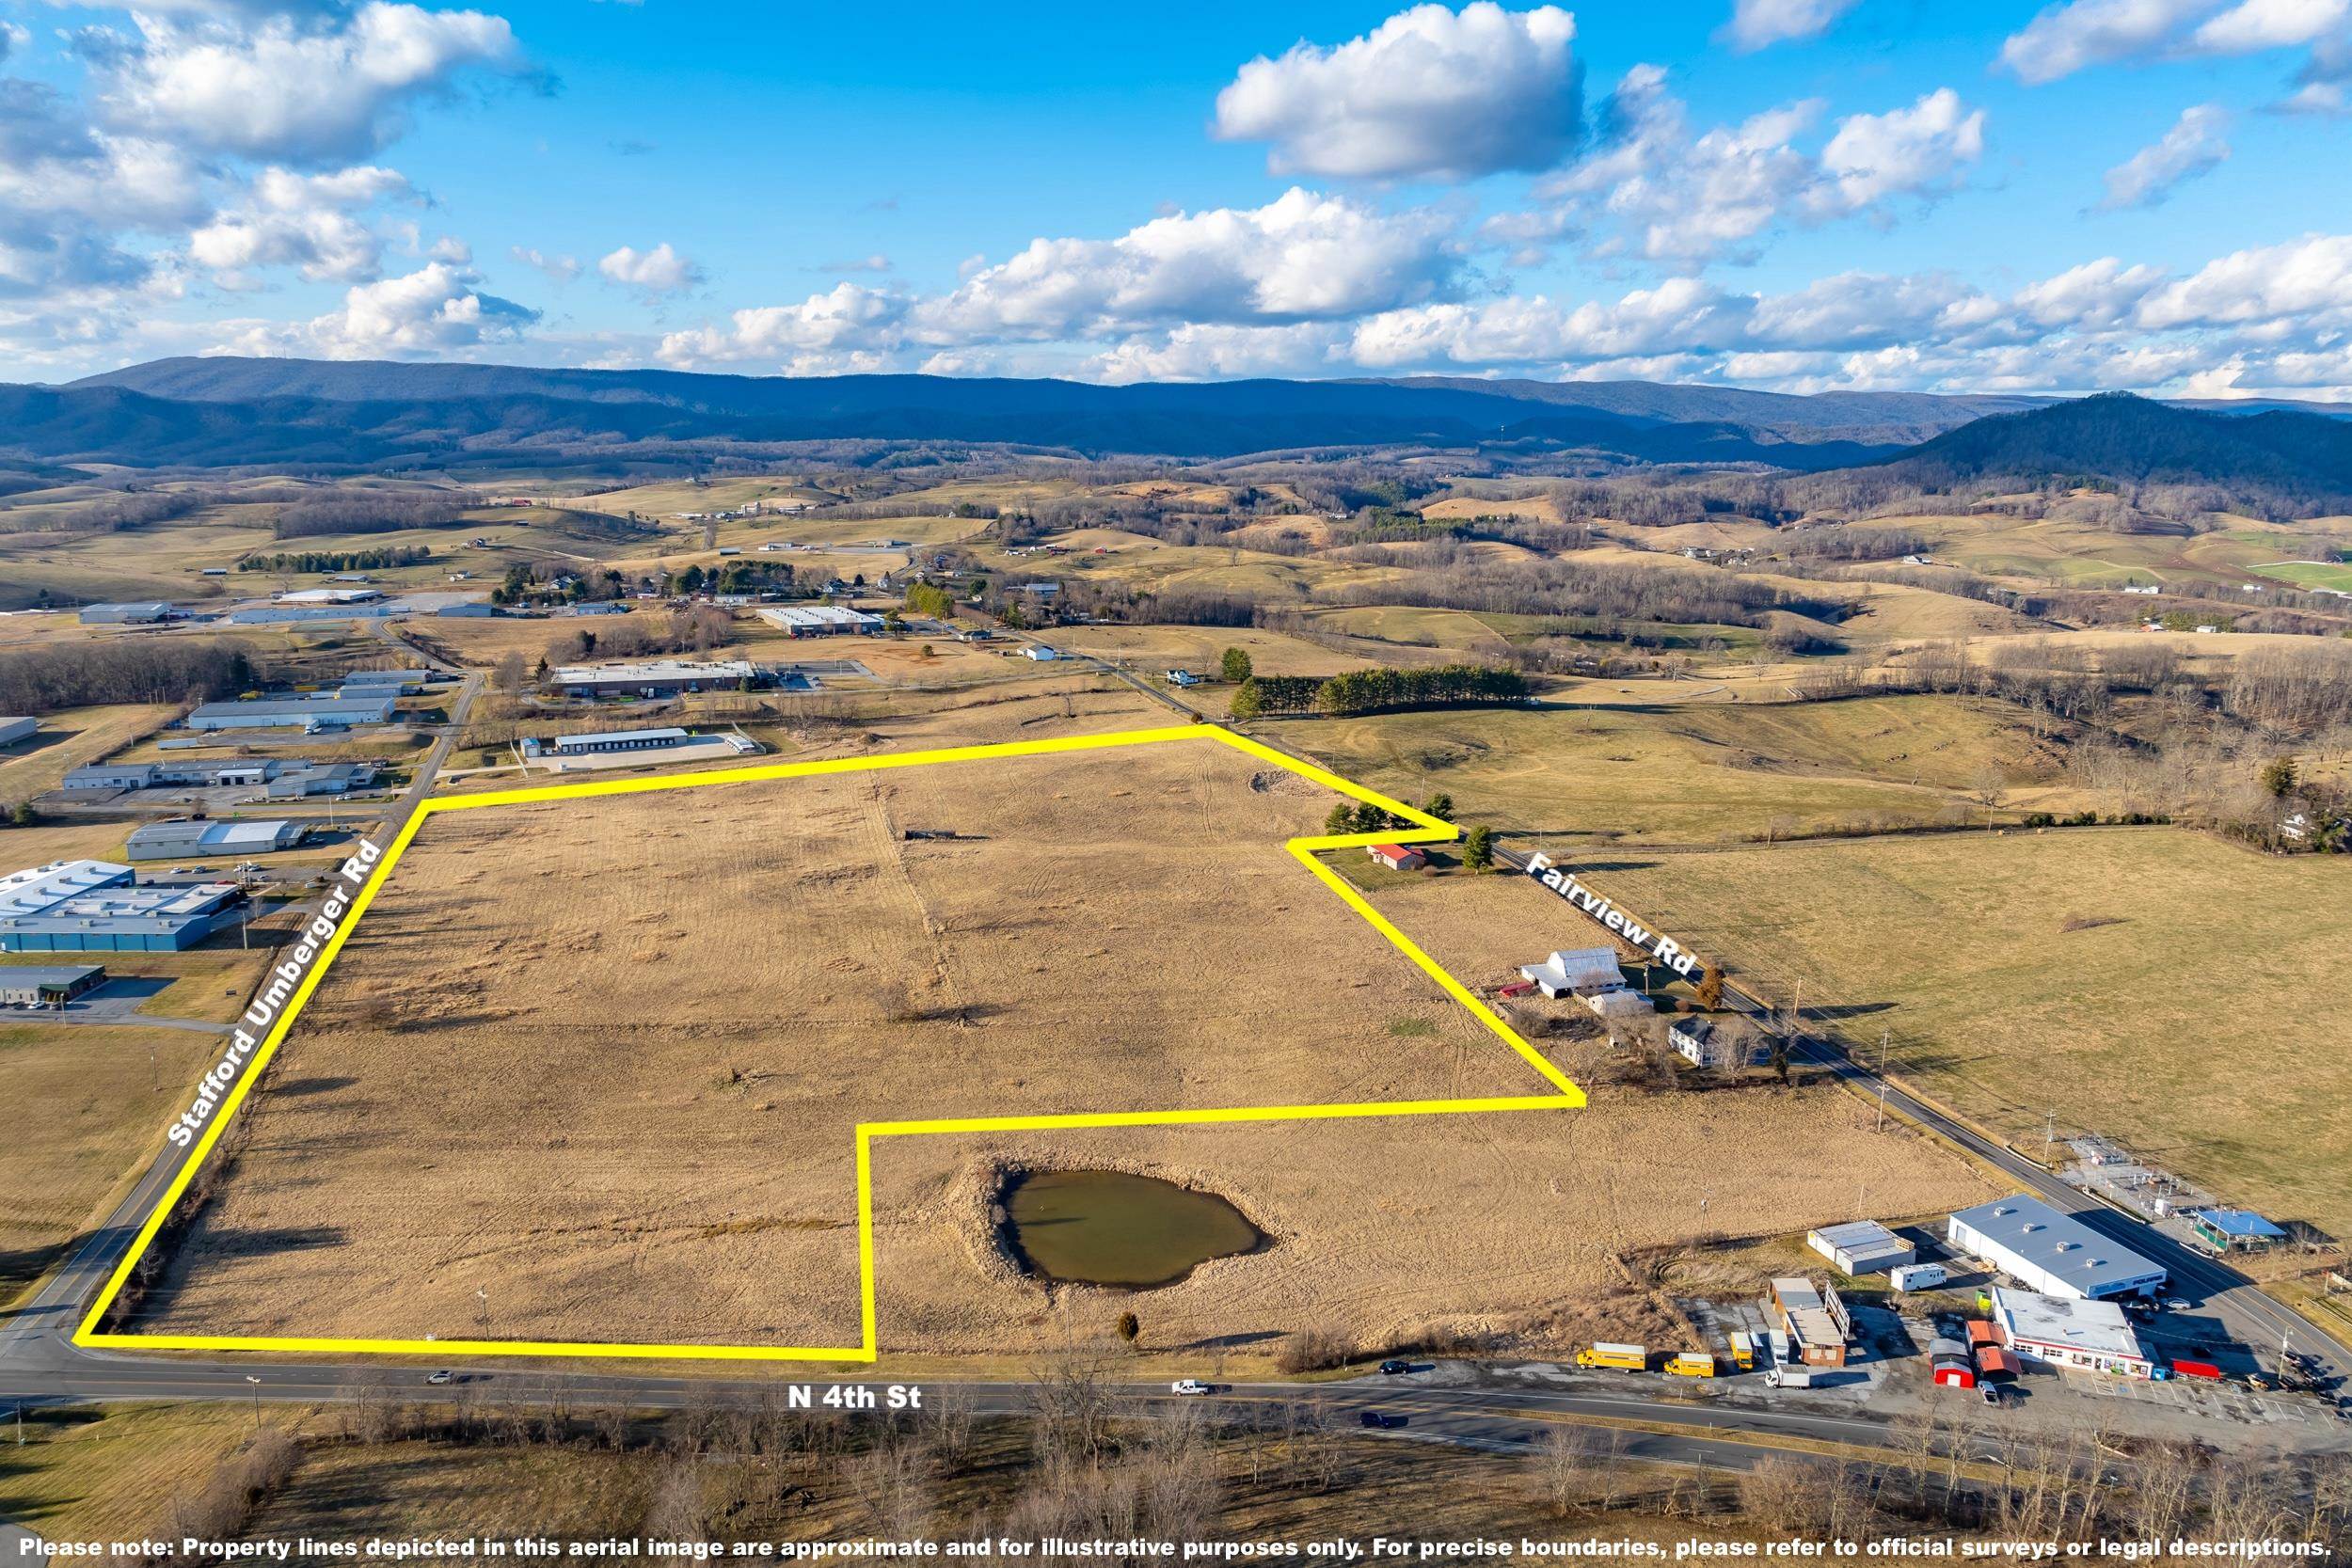 Excellent opportunity for business or manufacturers to develop a prime piece of property near the interstate and the town of Wytheville. Offering approximately 35 acres to be determined from a larger tract. Nearly level property has road frontage on Stafford Umberger Drive, US Hwy 52/N 4th St, and Fairview Road. Majority of the property is zoned M-1 Industrial and the balance as B-2, and in potential enterprise zone. All utilities (water, sewer, electric, gas) are available along Stafford Umberger Drive. Contact Listing agent for more details and with questions about varying property lines.